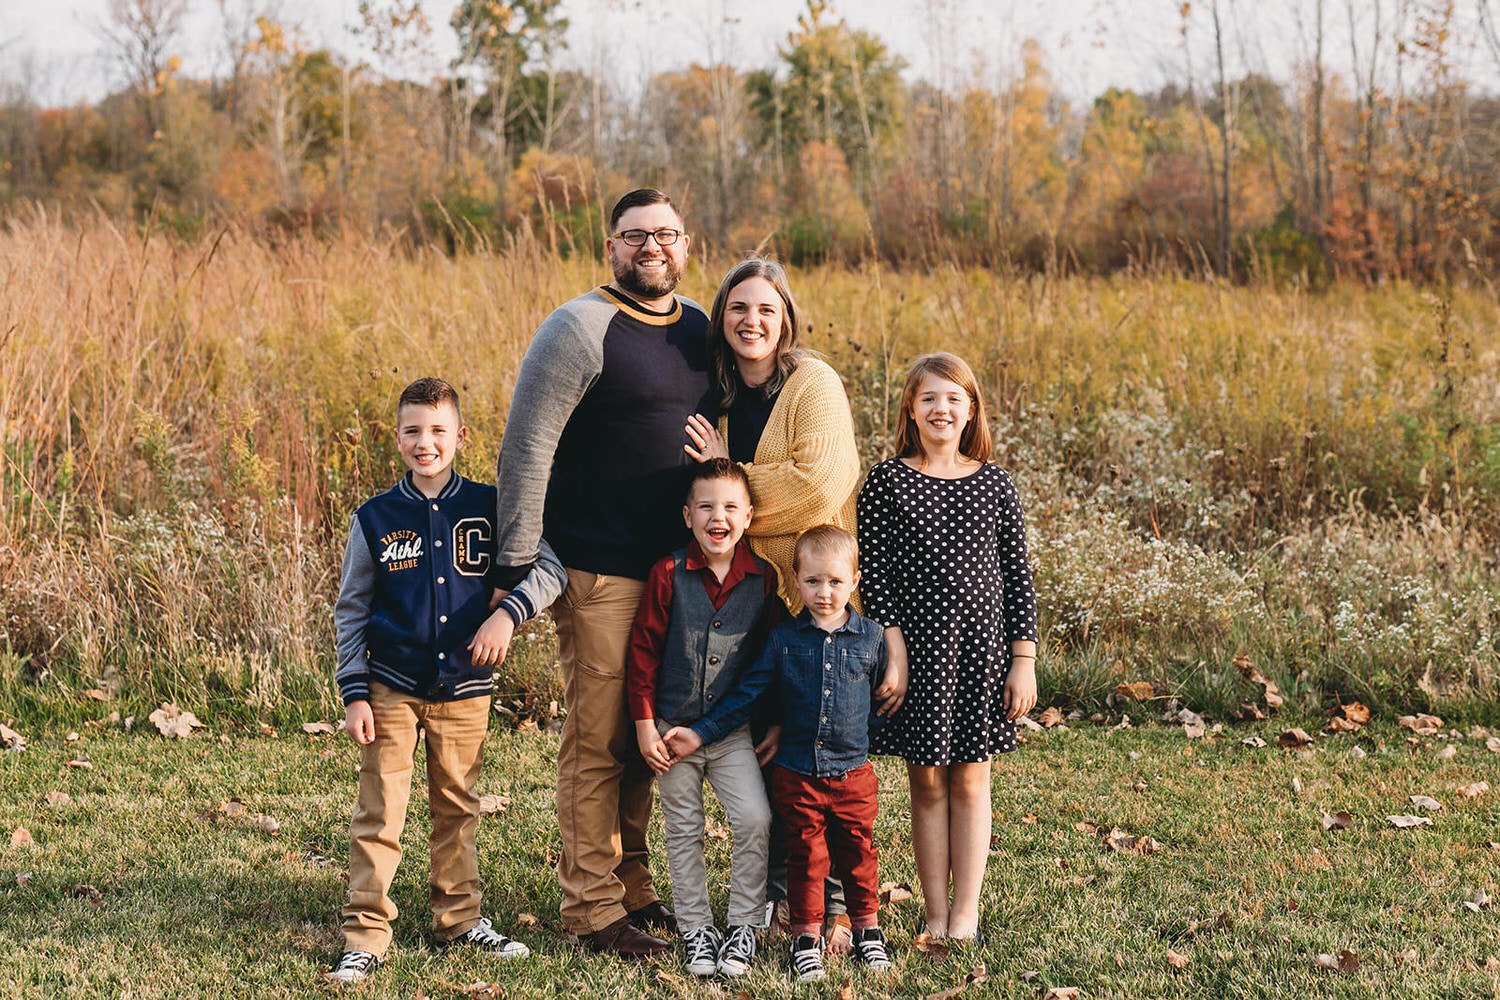 family of 6 in front of tall grass in these Carmel Fall Family Photos